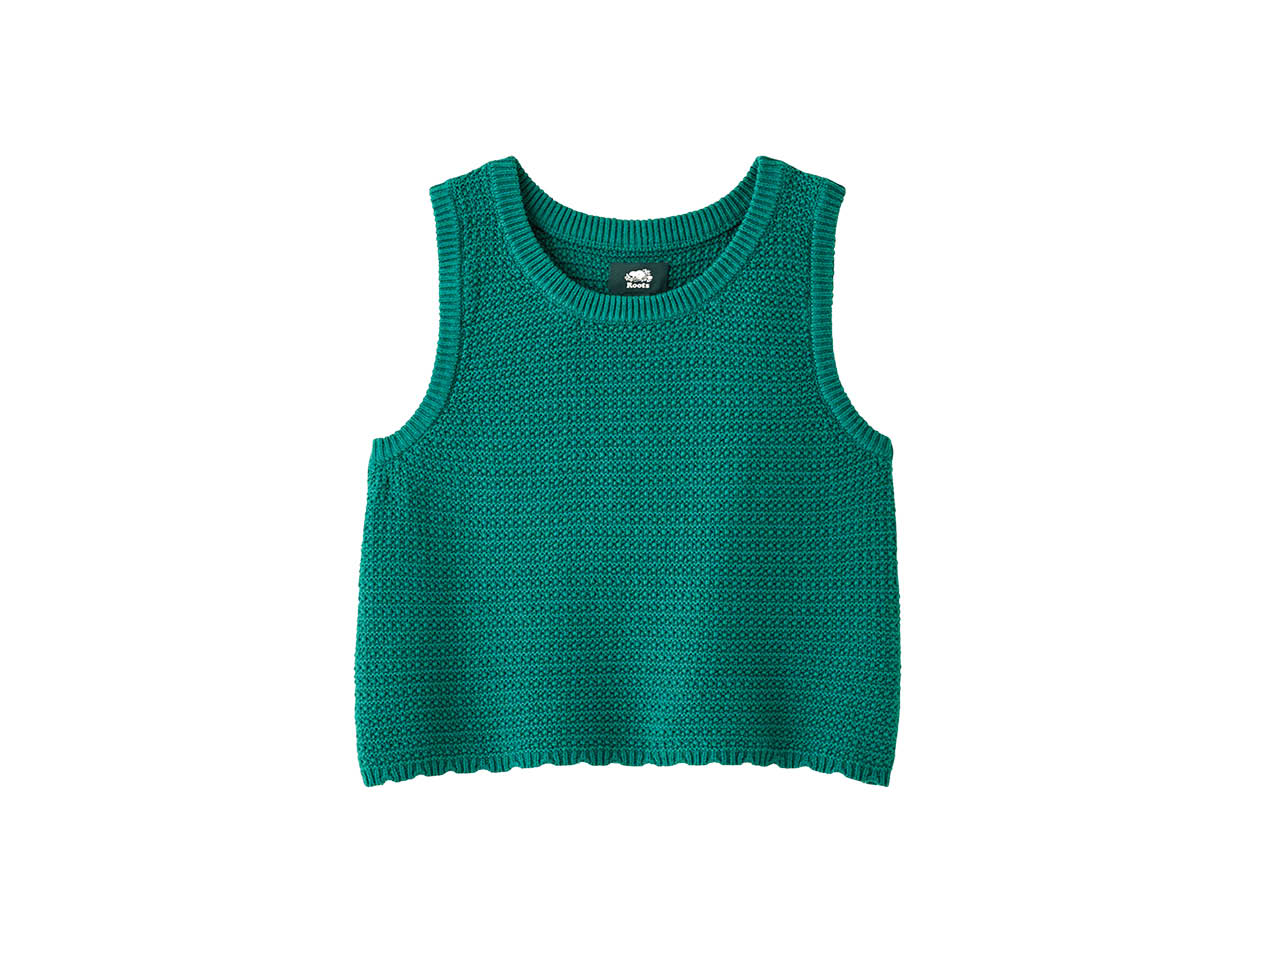 Roots' green crochet top is perfect for summer outfits.